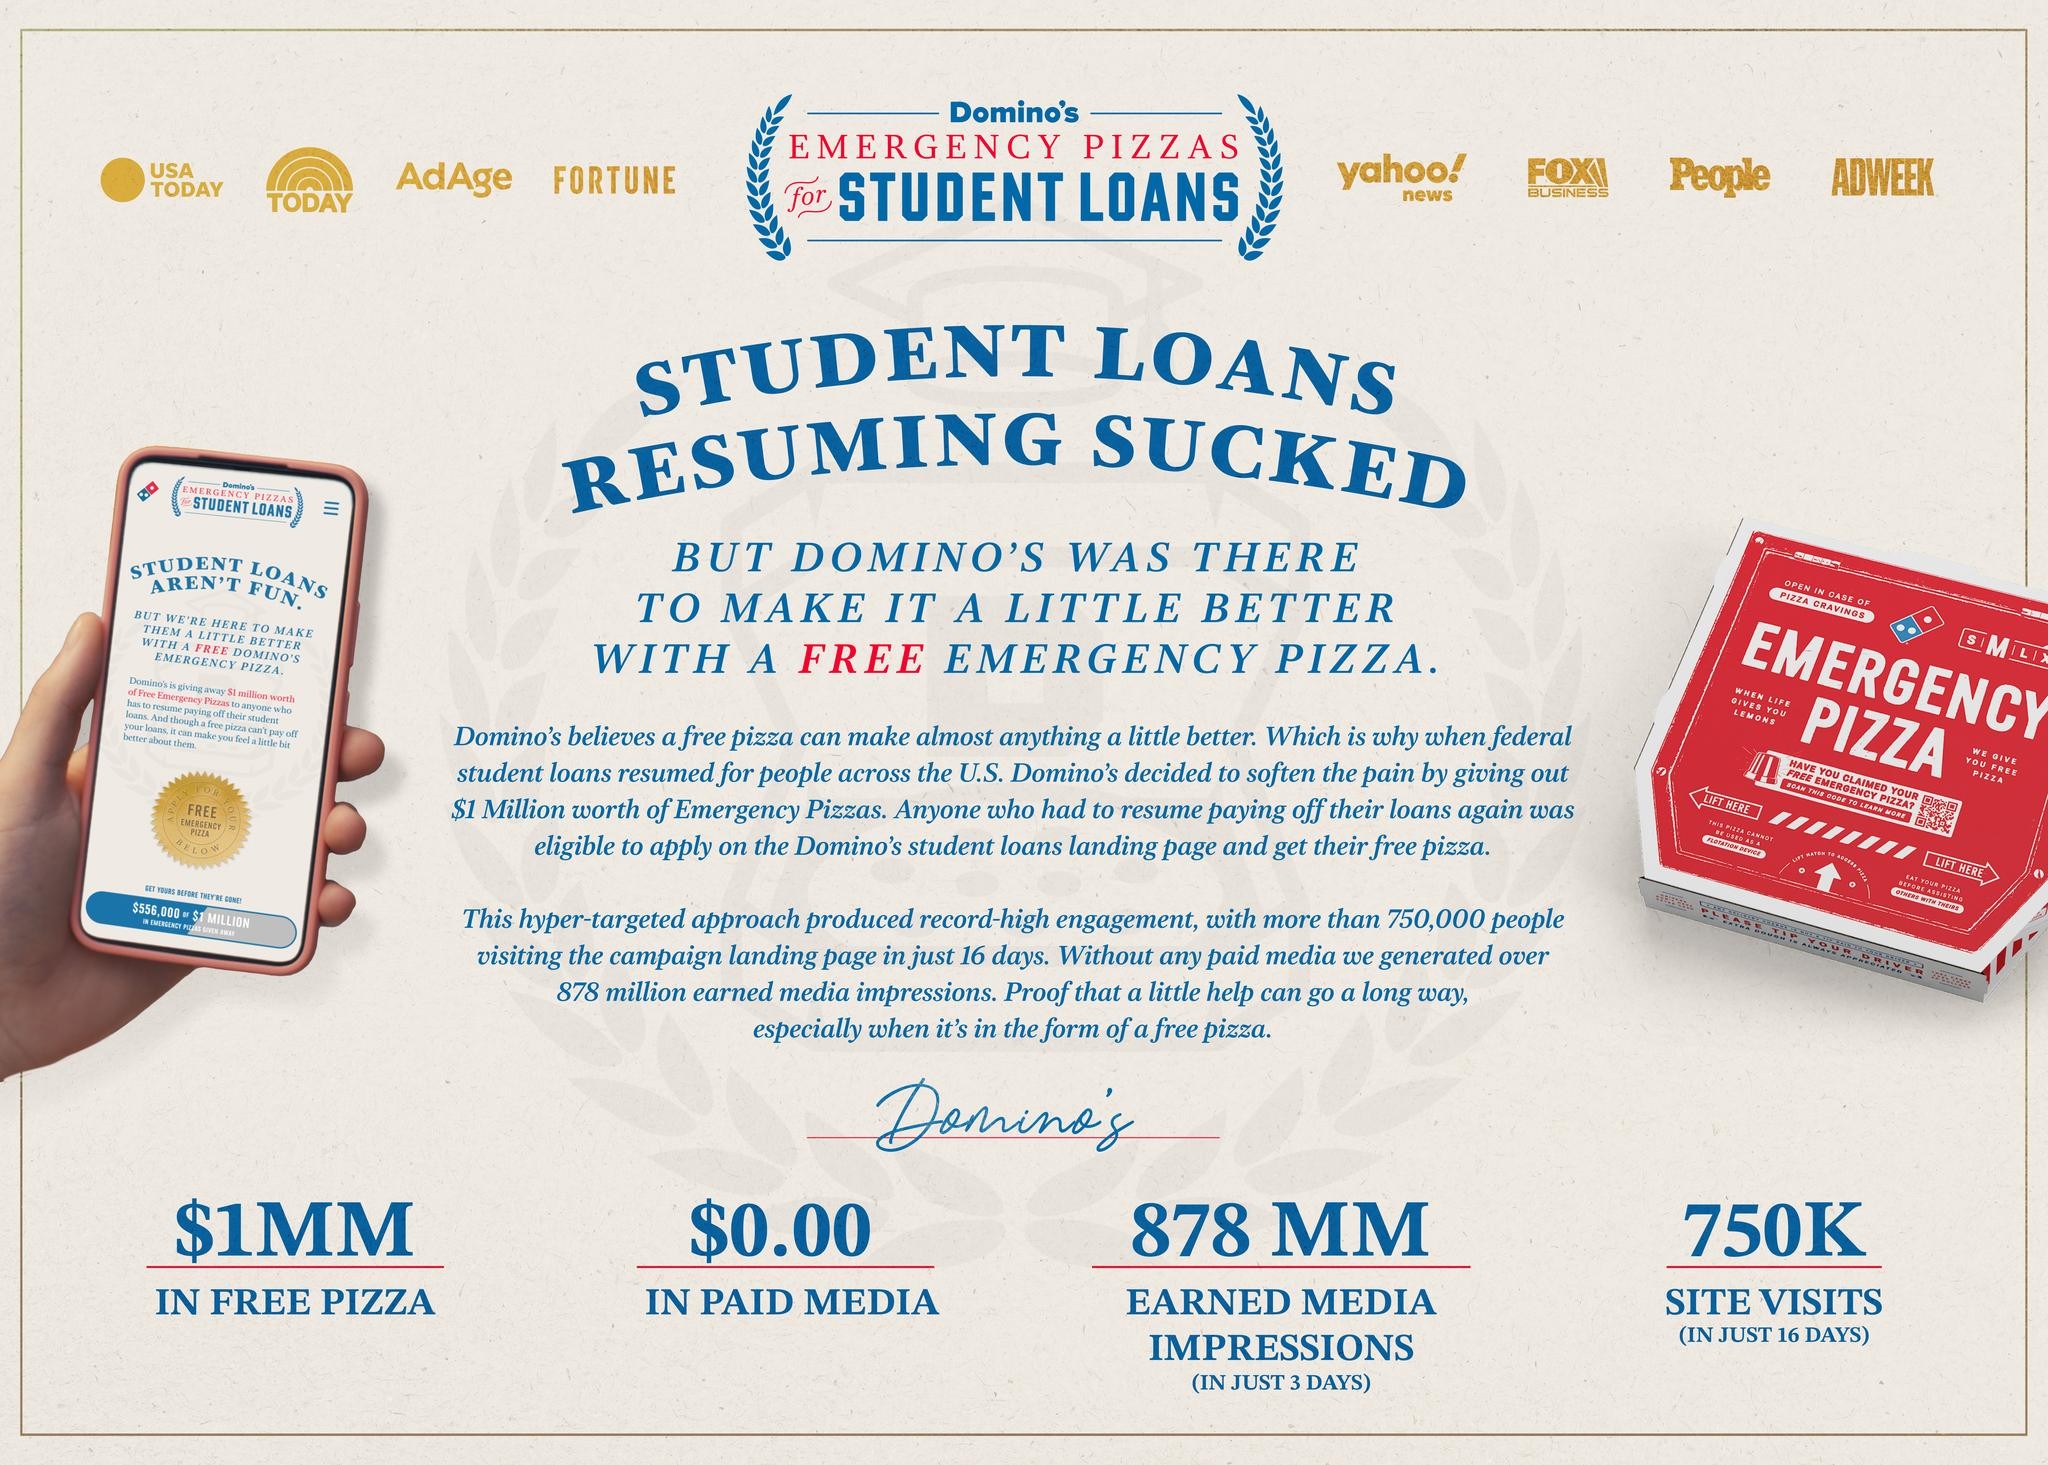 Domino's Emergency Pizza for Student Loans